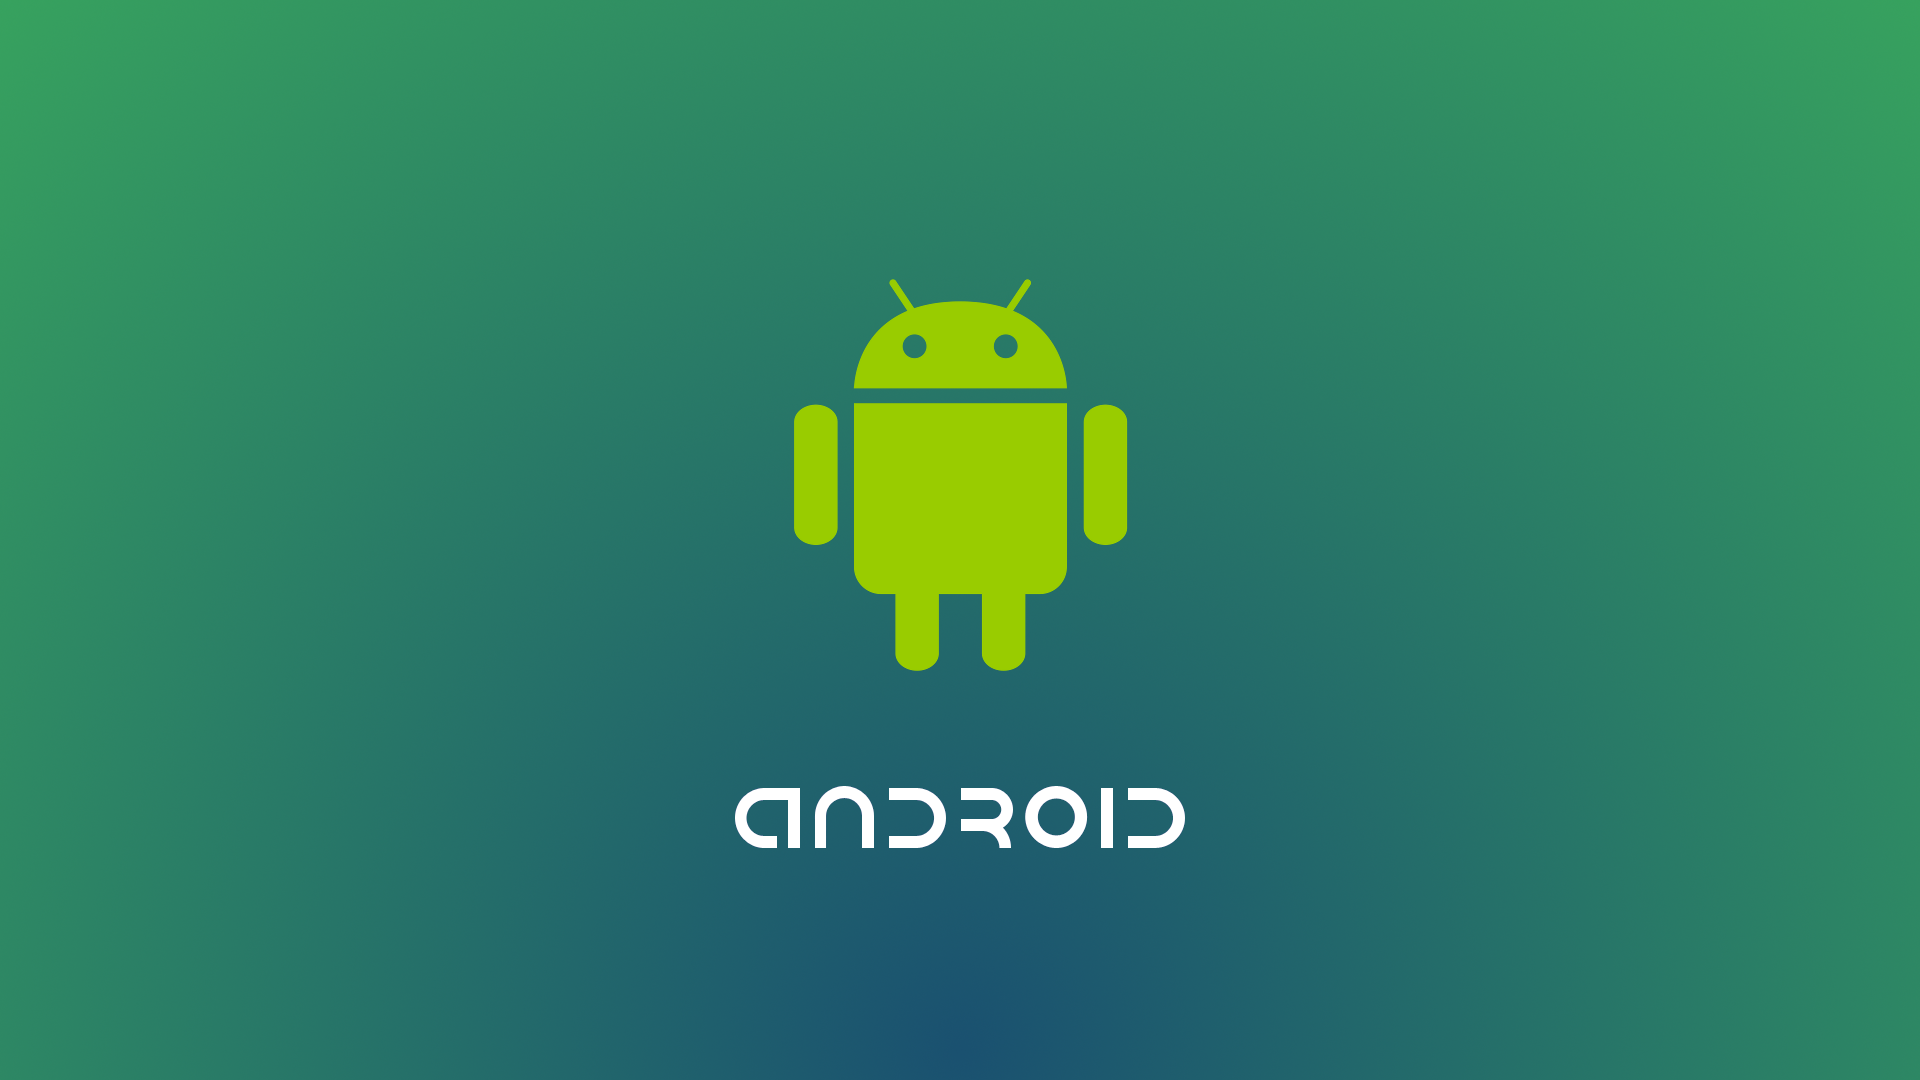 An image of an Android logo